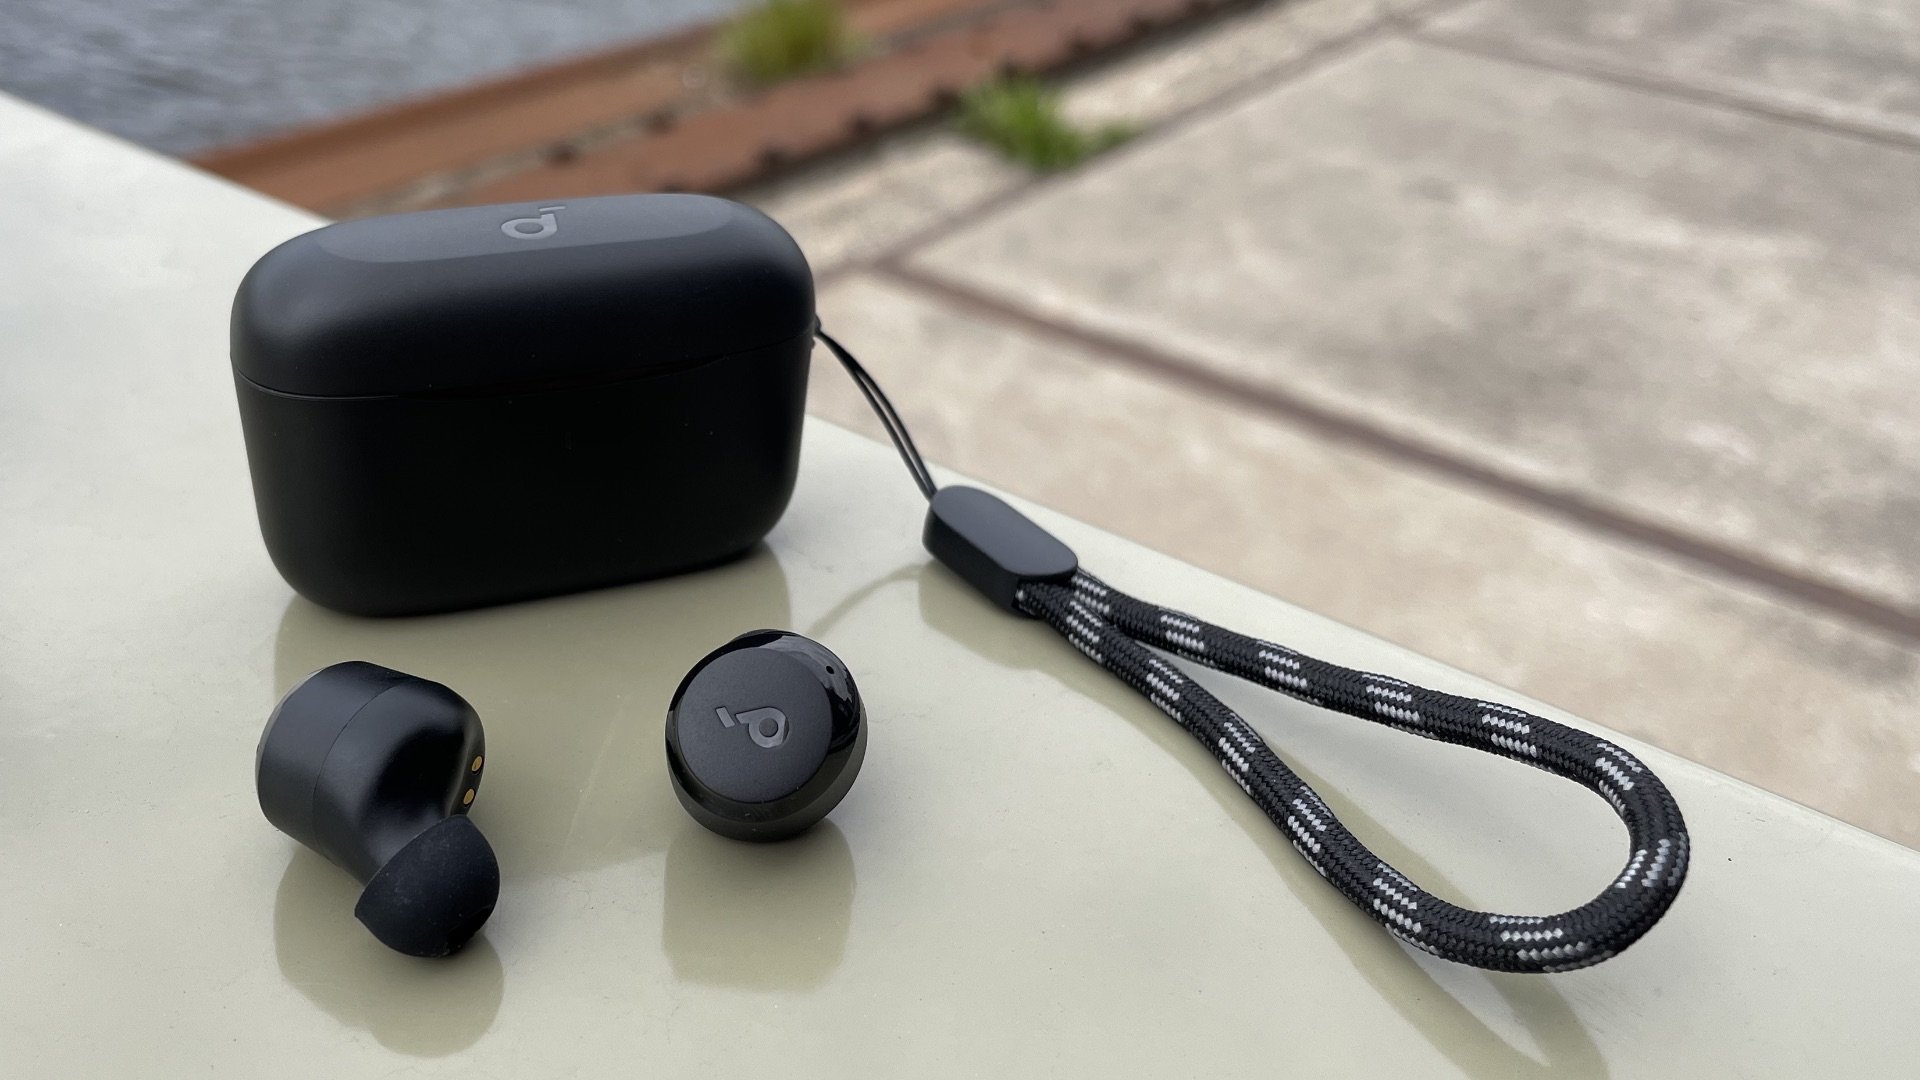 Moondrop Space Travel review: Cost-performance ANC earbuds under $25 -  Qucox